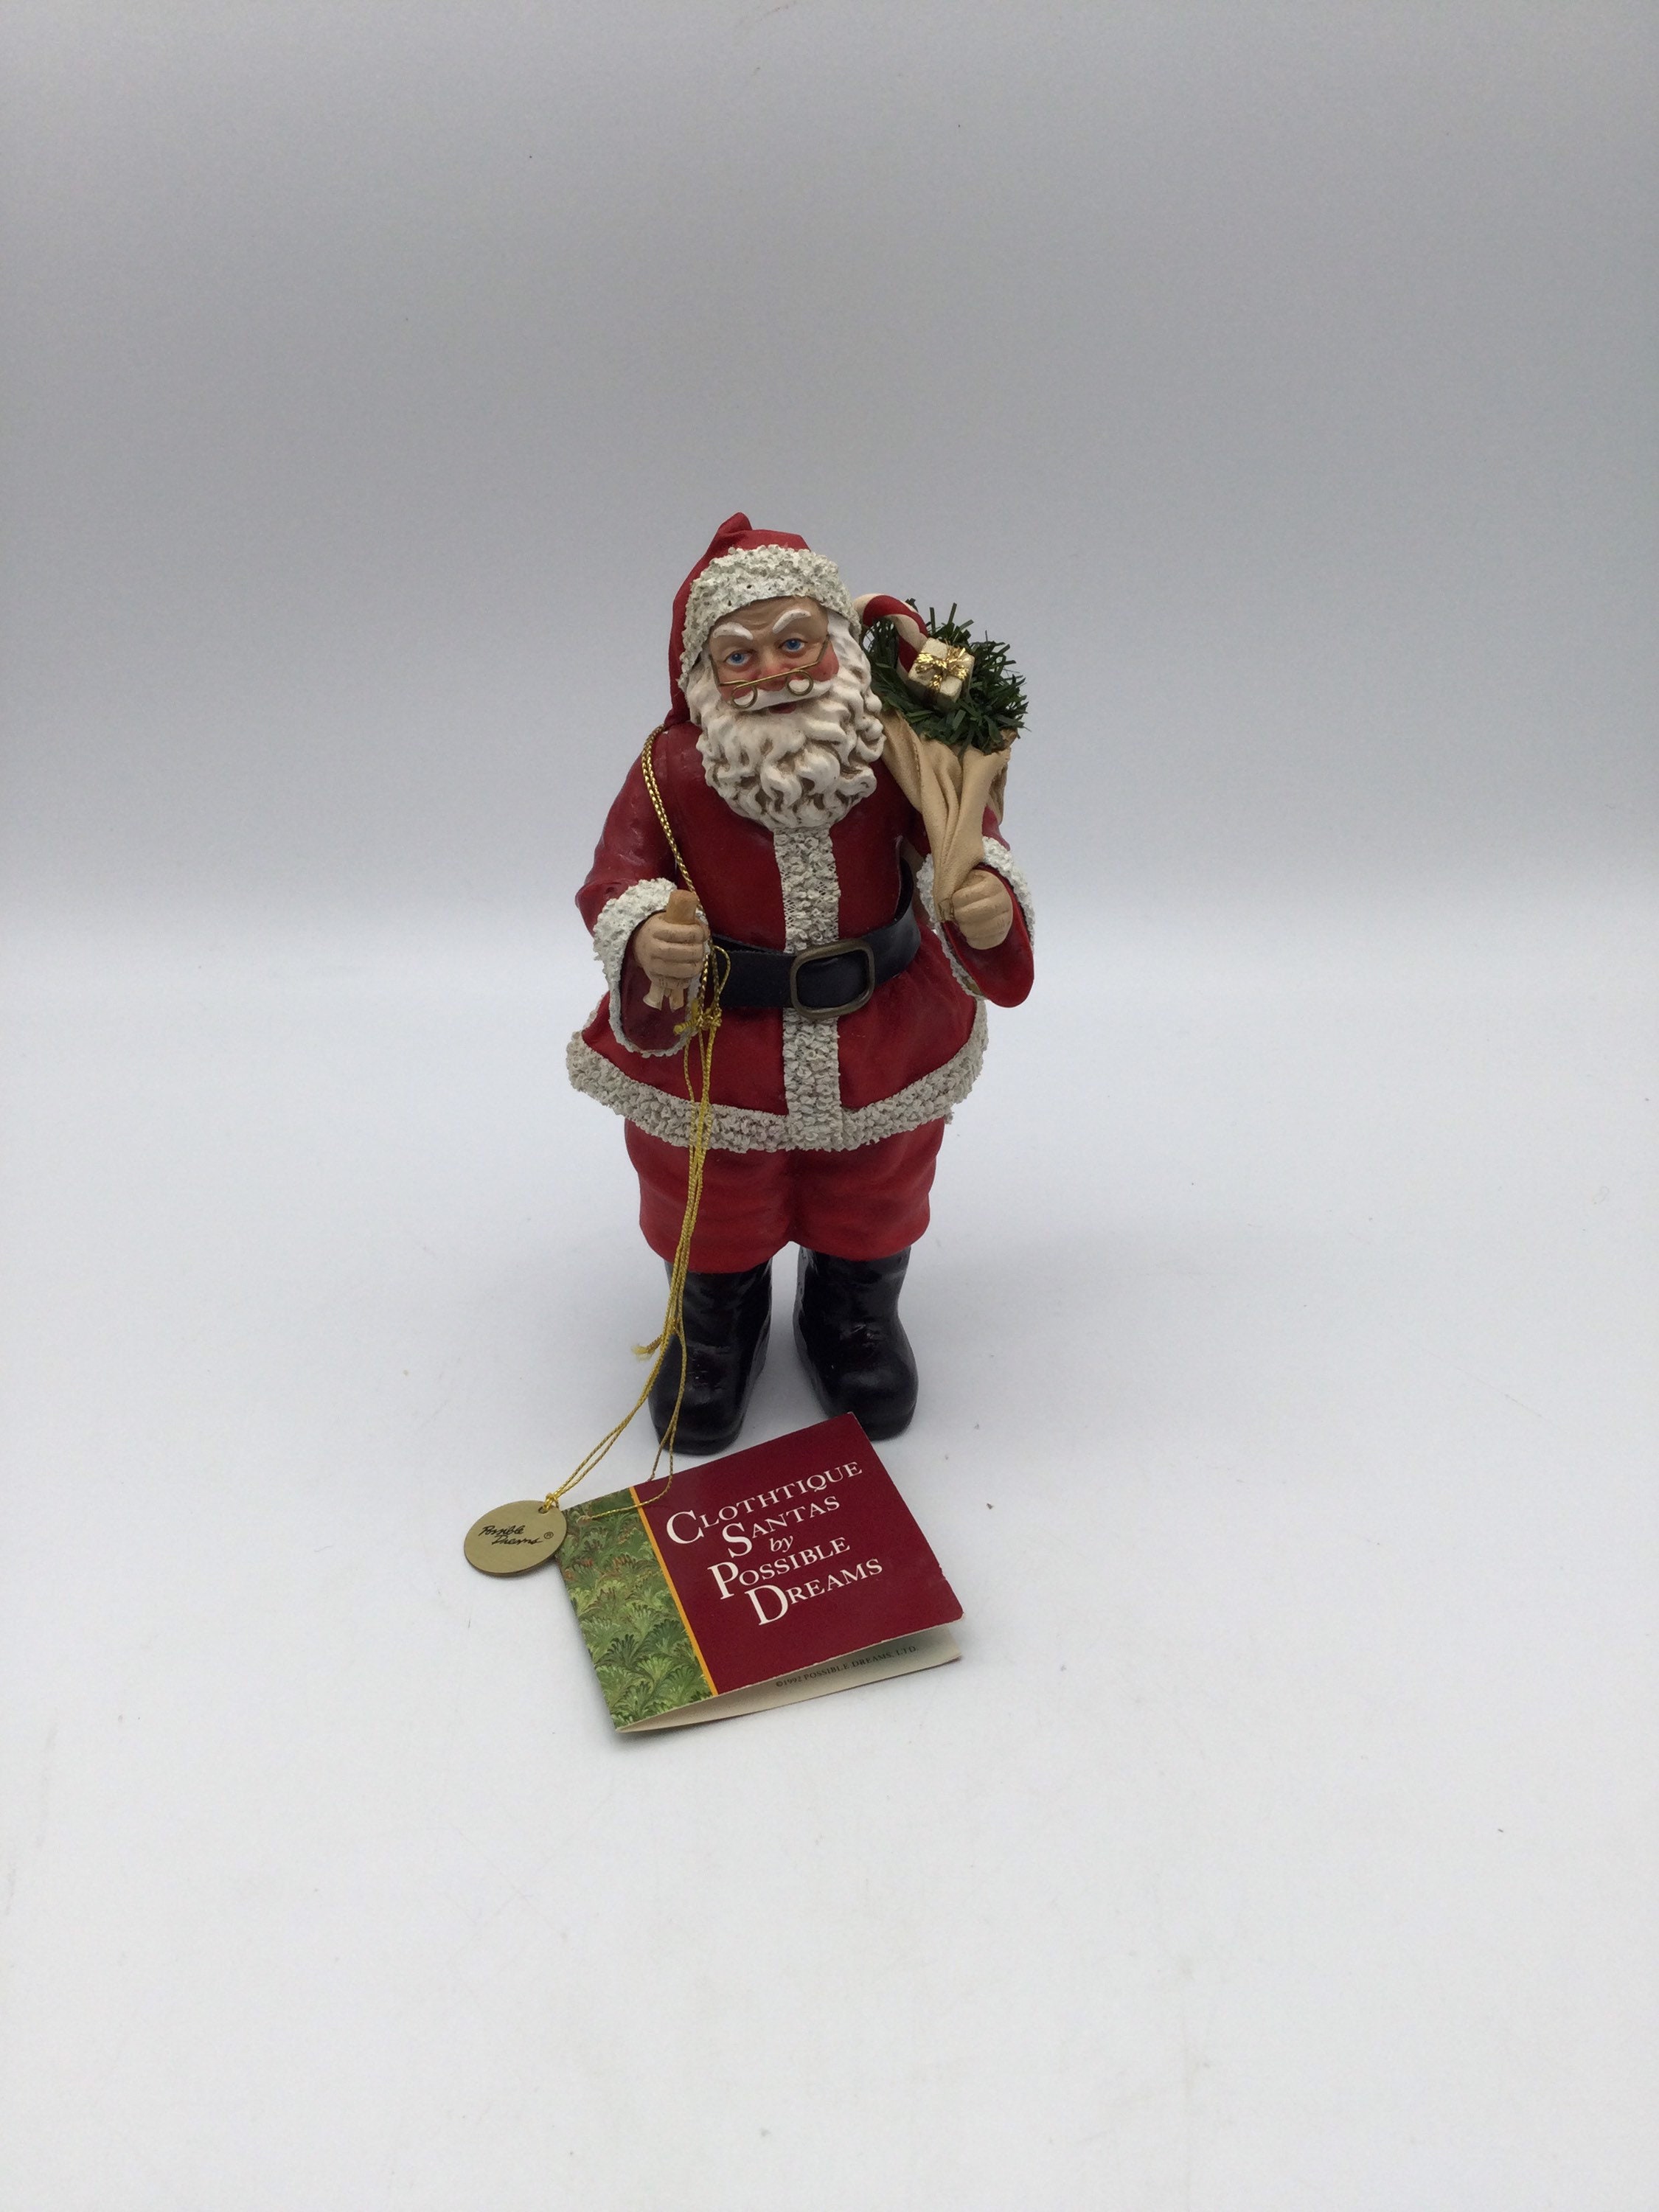 Touch of Class Christmas Brew Beer Santa Clothtique Figurine Set